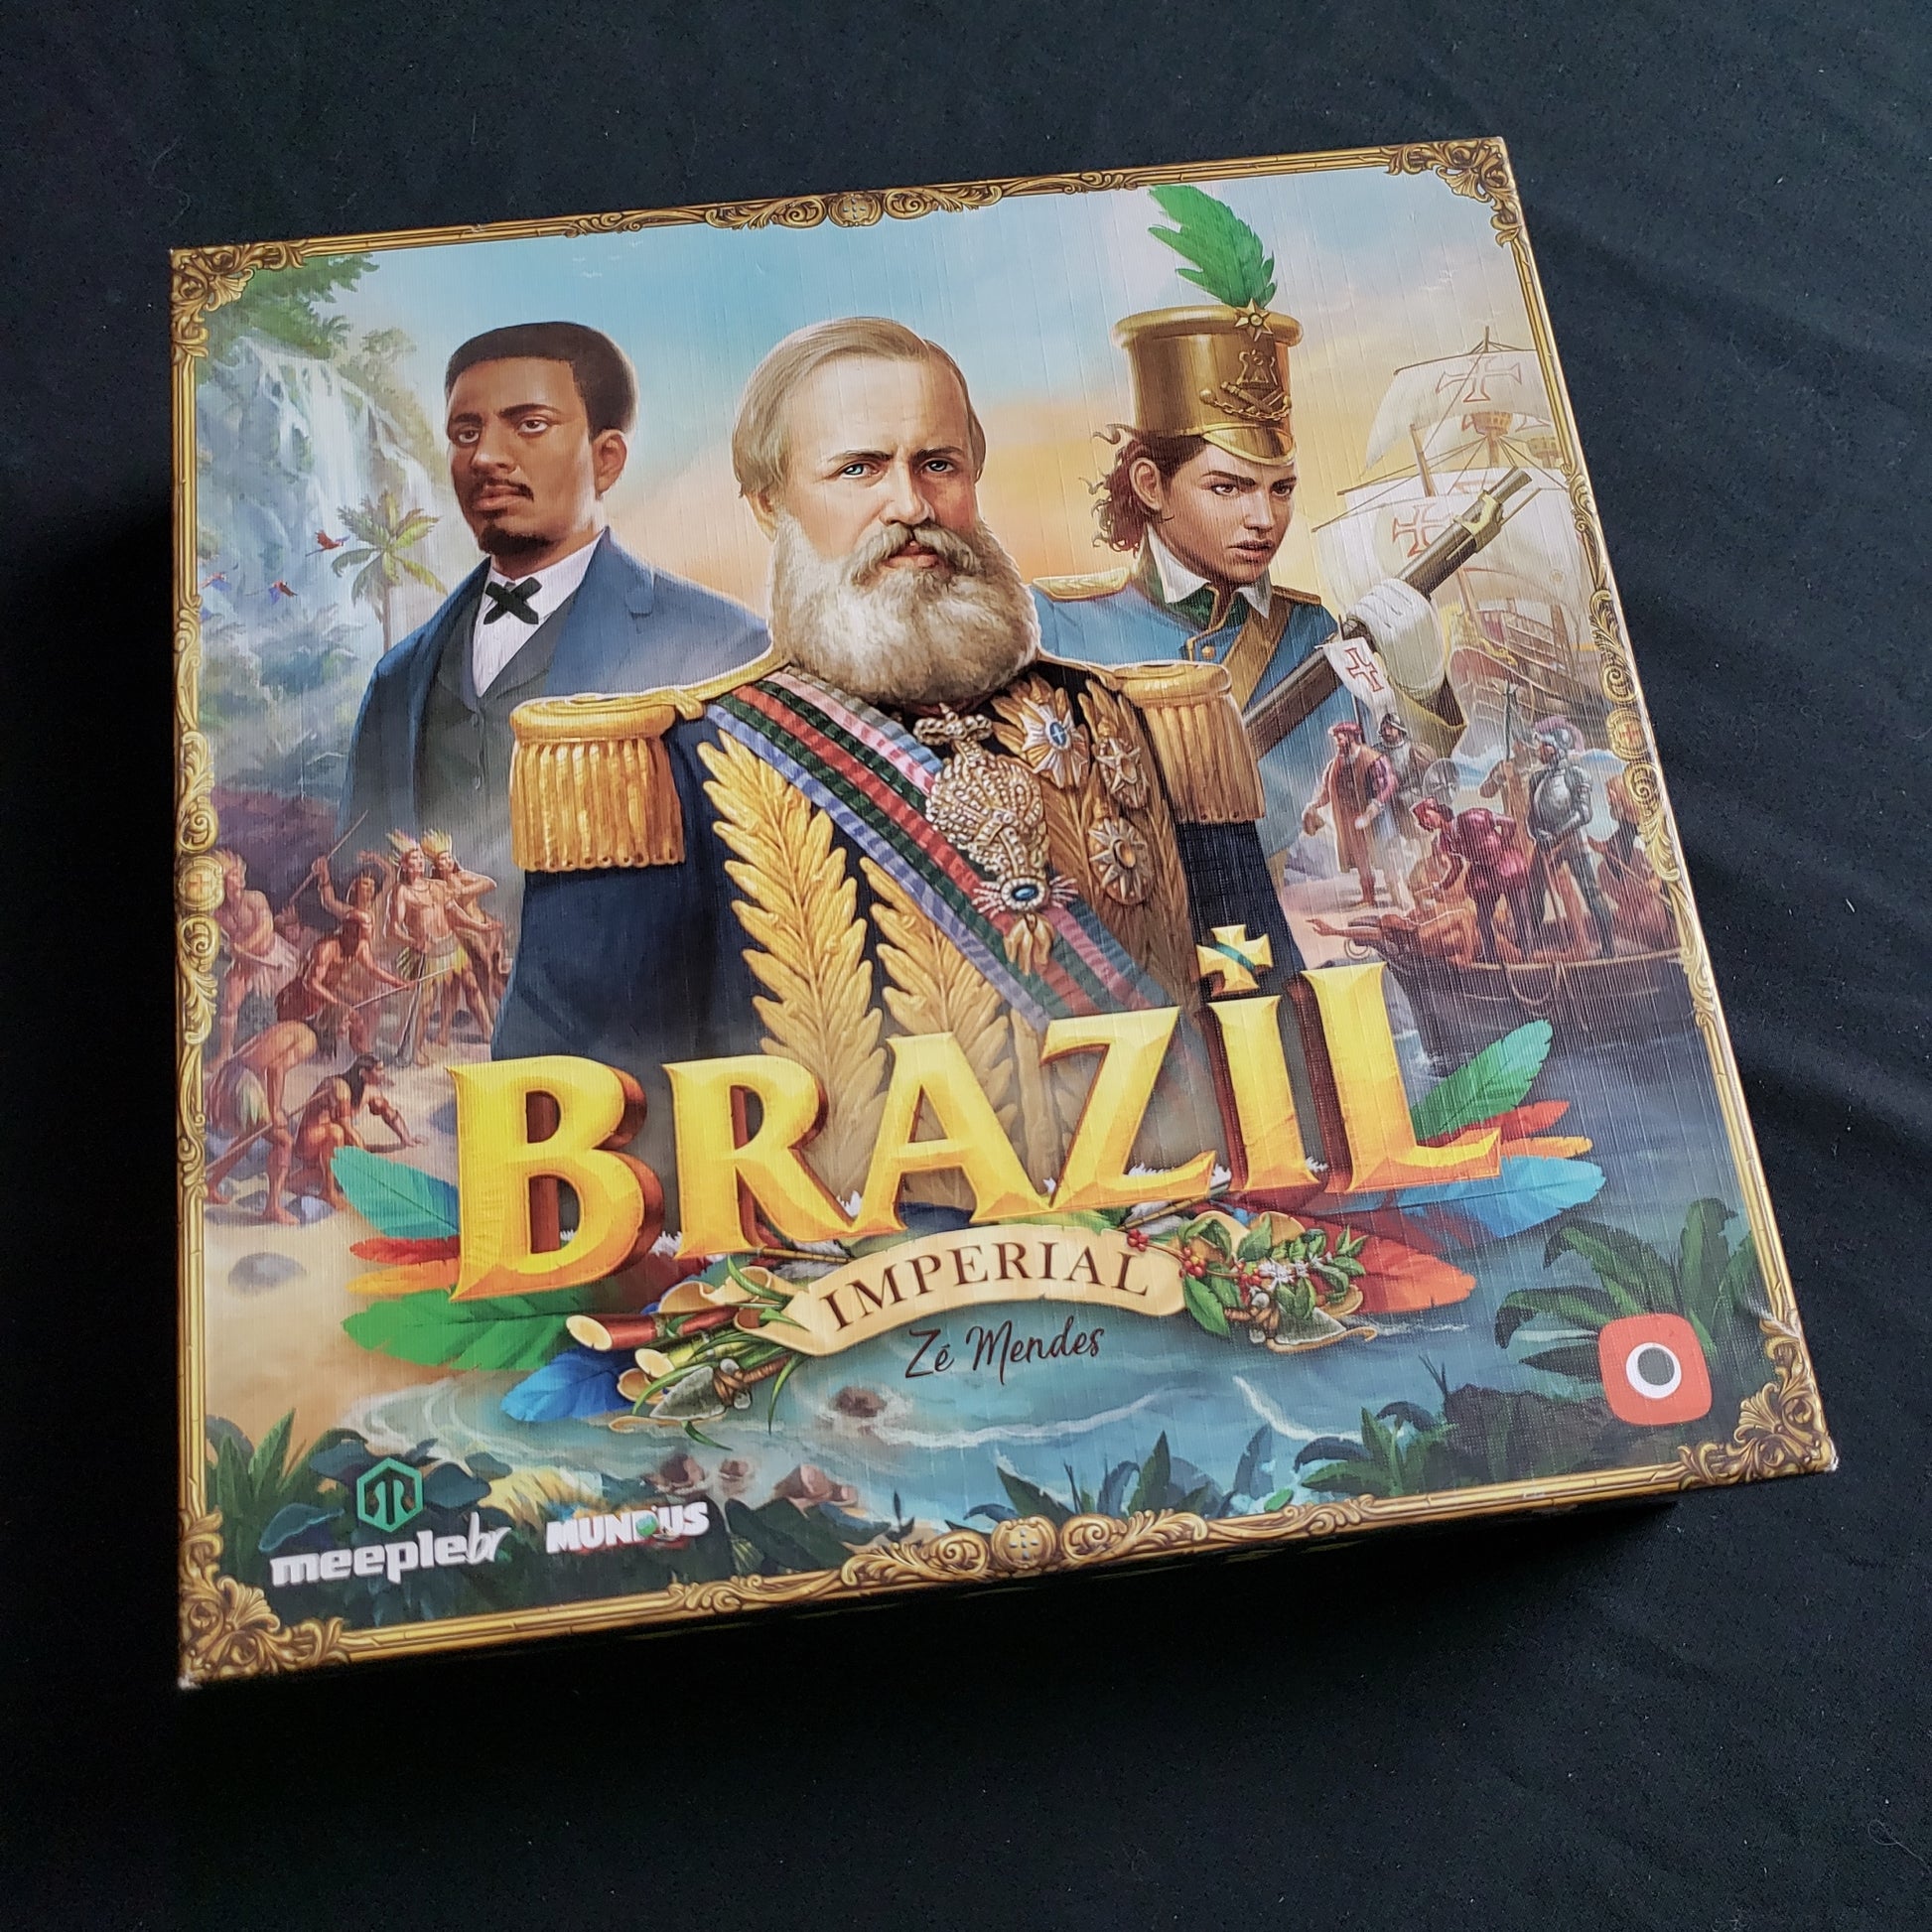 Image shows the front cover of the box of the Brazil: Imperial board game